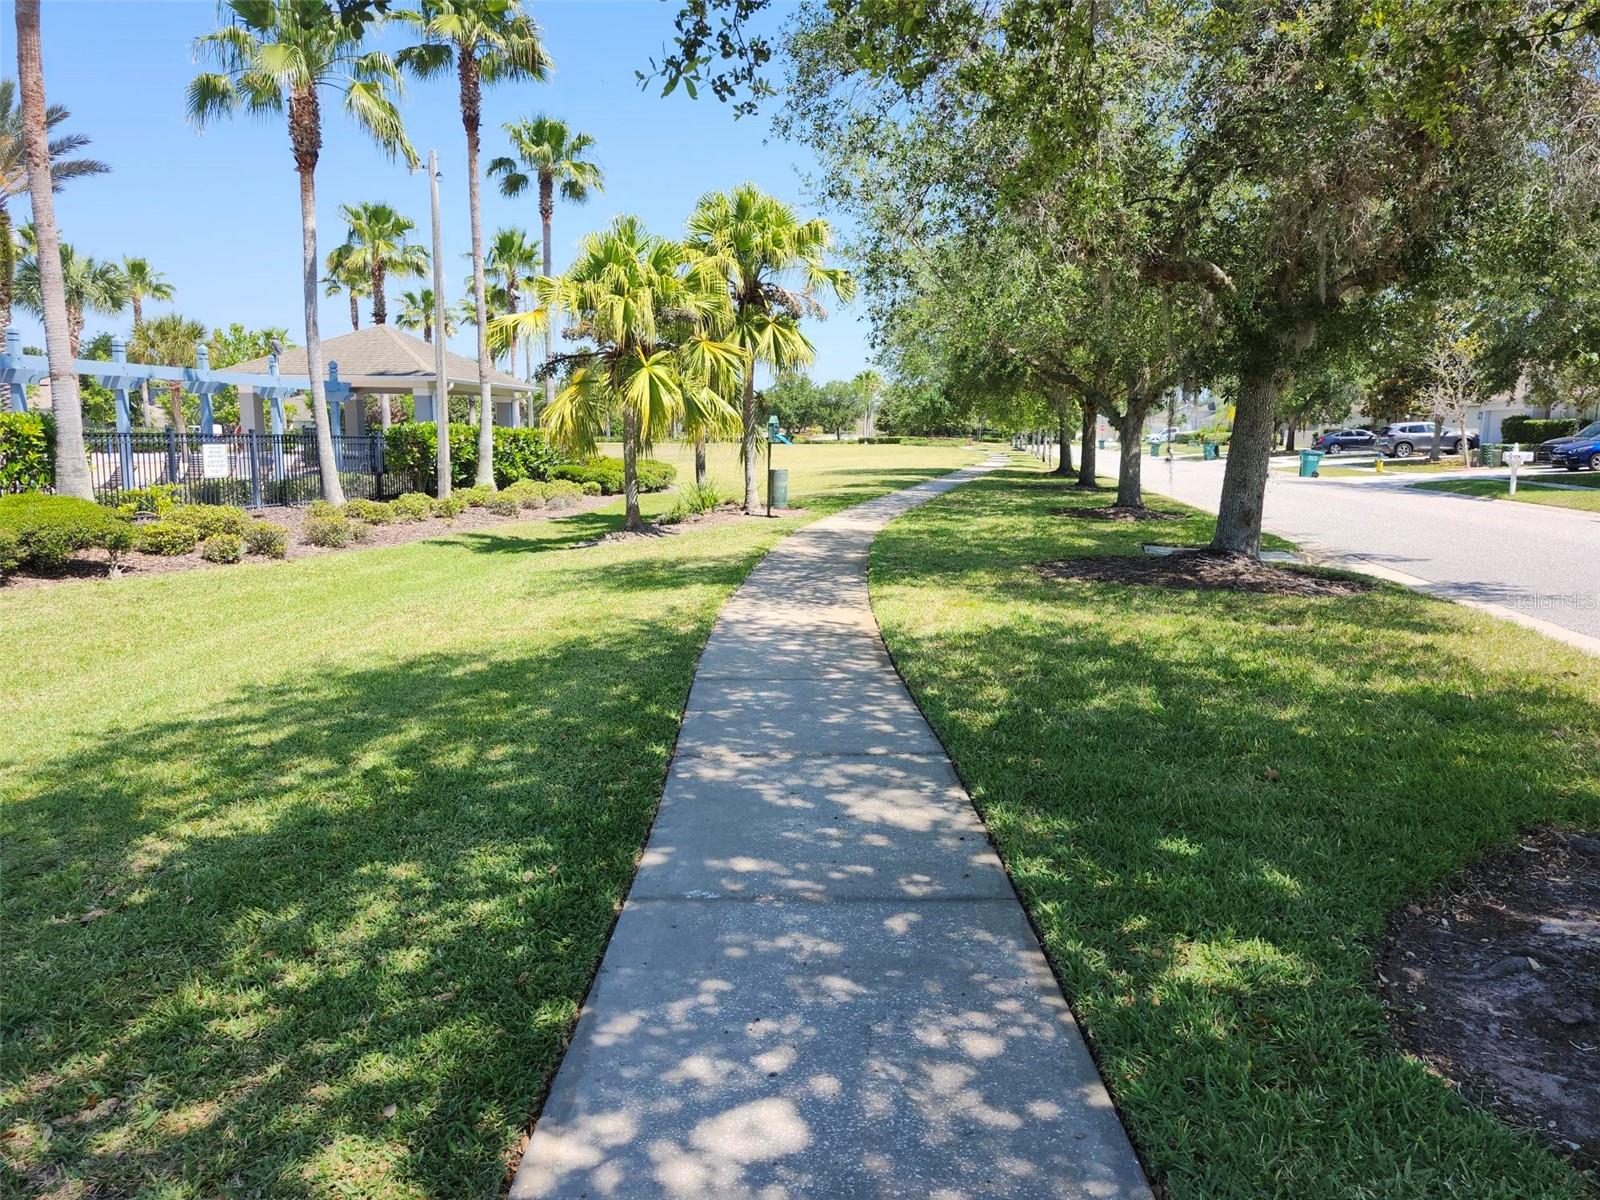 Walking trail through out community